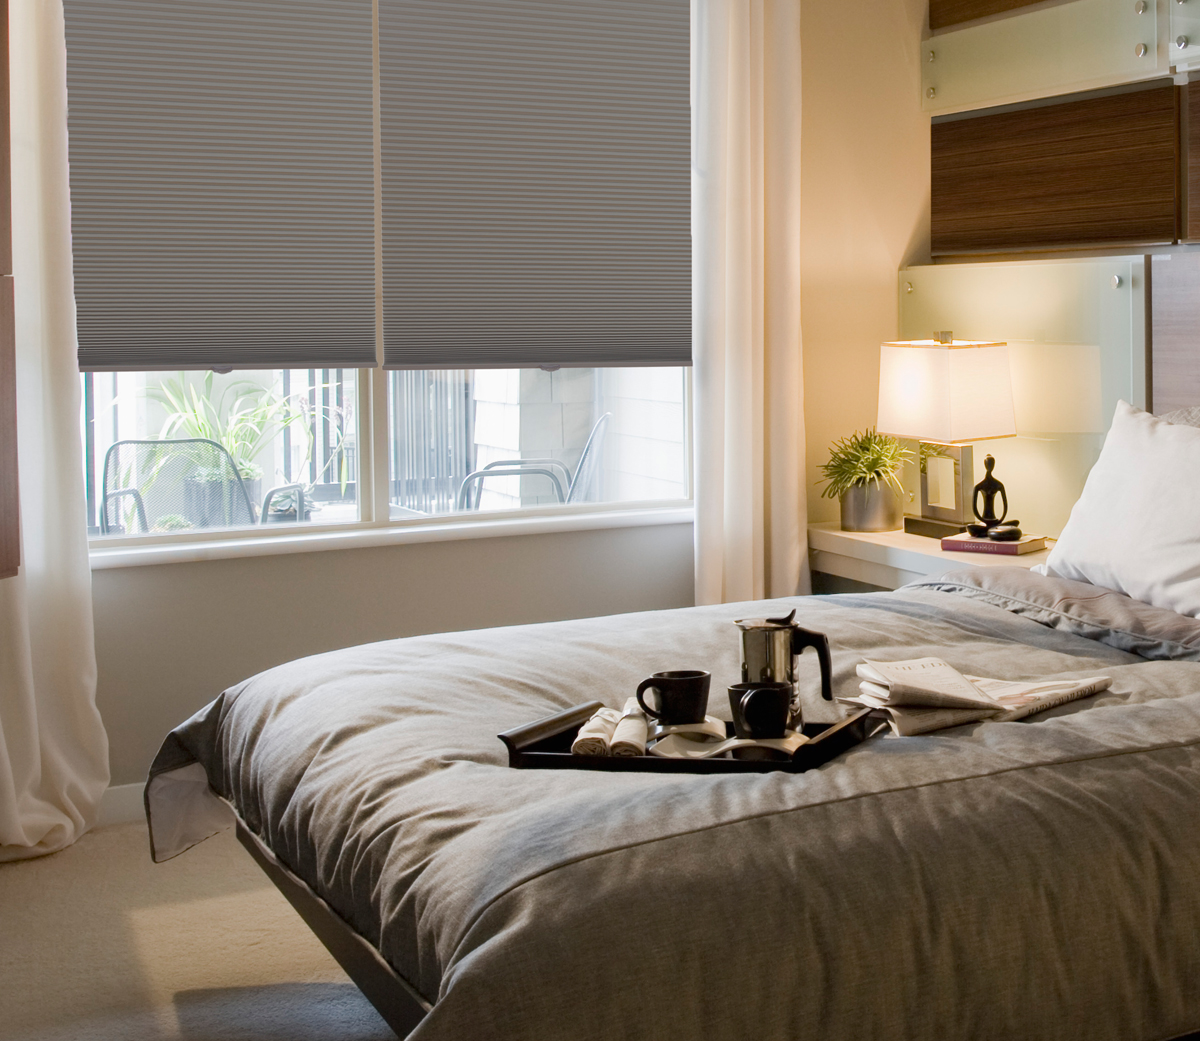 Bring On The Right Feel To The Spaces With Affordable Blinds